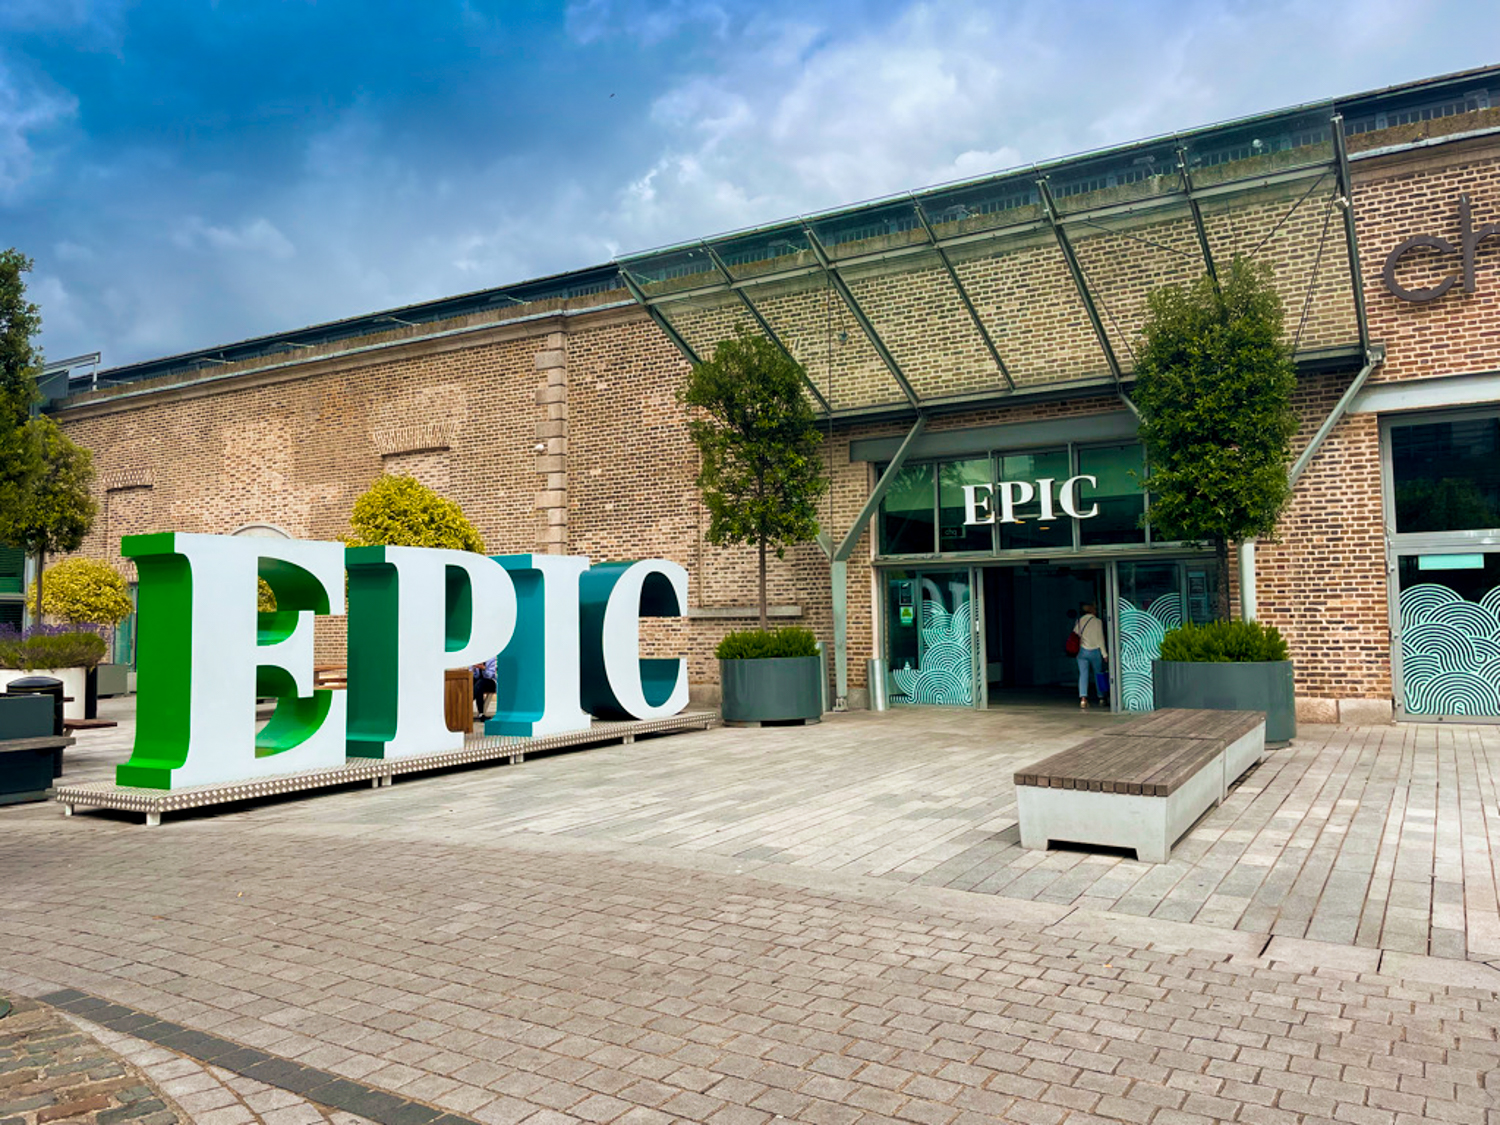 The brick facade of the EPIC museum gives way to the glass entranceway. To the side, gigantic letters reading EPIC invite visitors to take photos beside them.